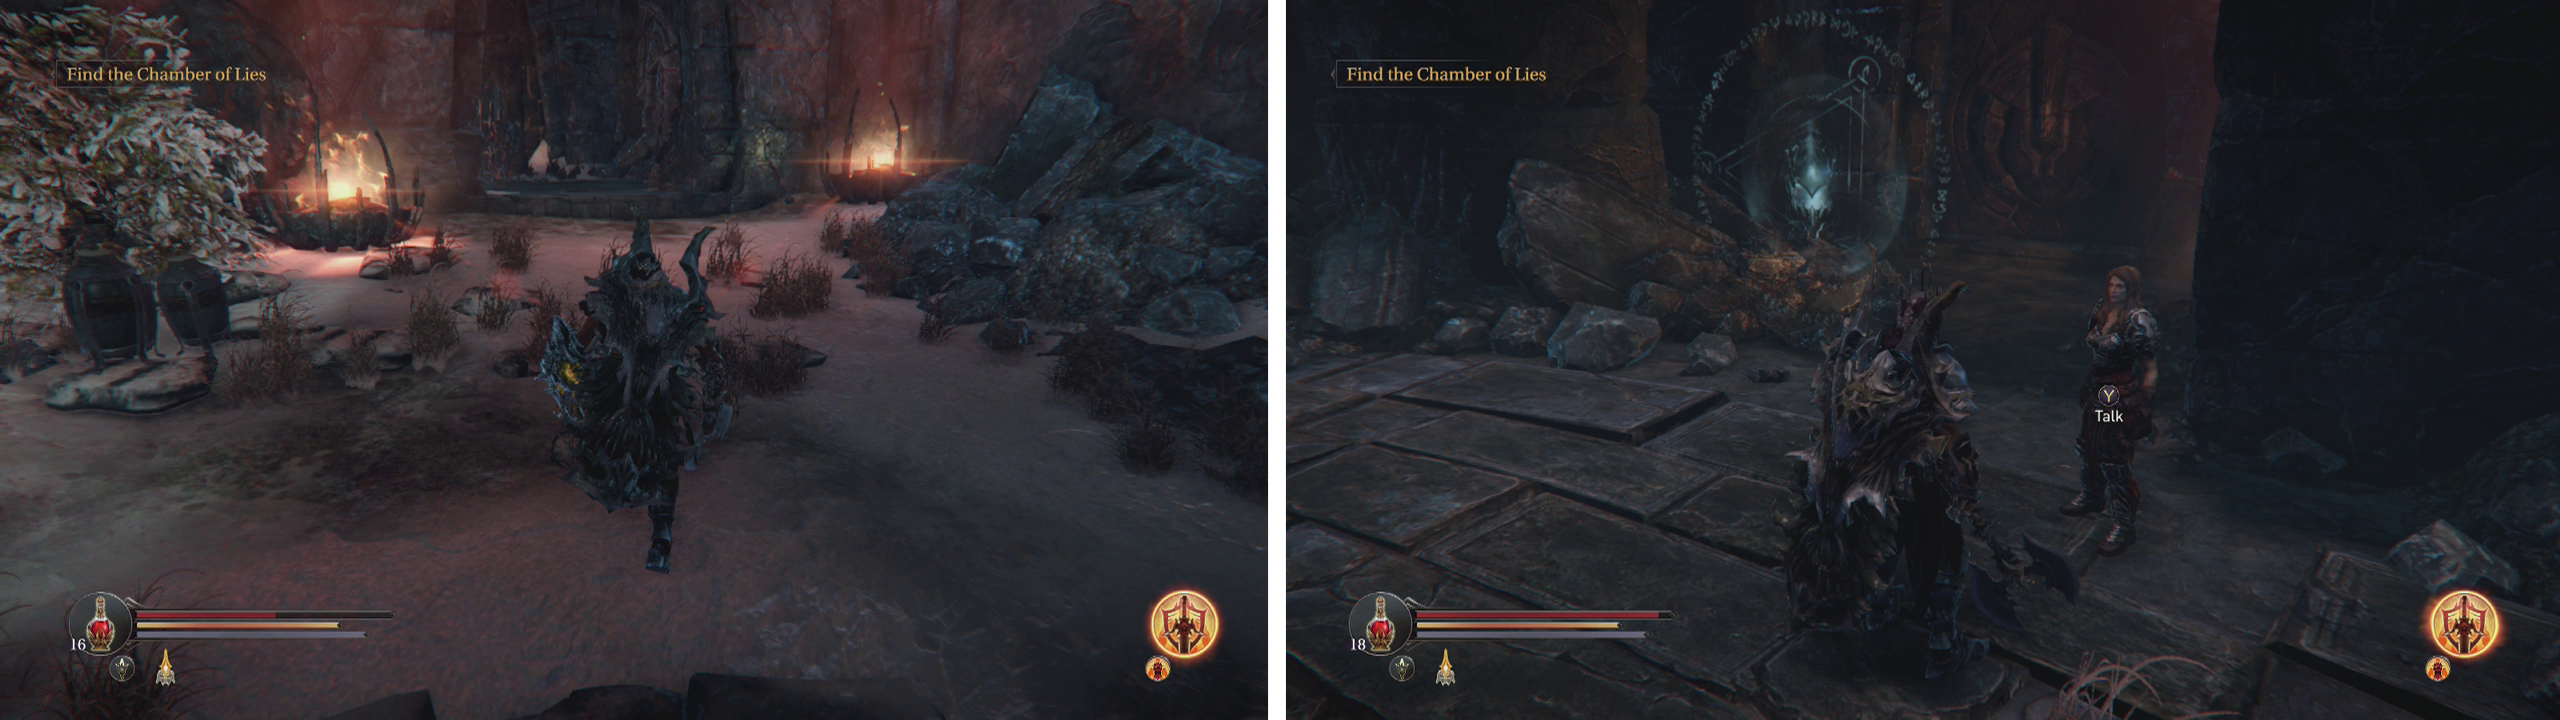 Re-enter the Rhogar Temple (left) and head for the Infiltrator's area to find Yetka (right).